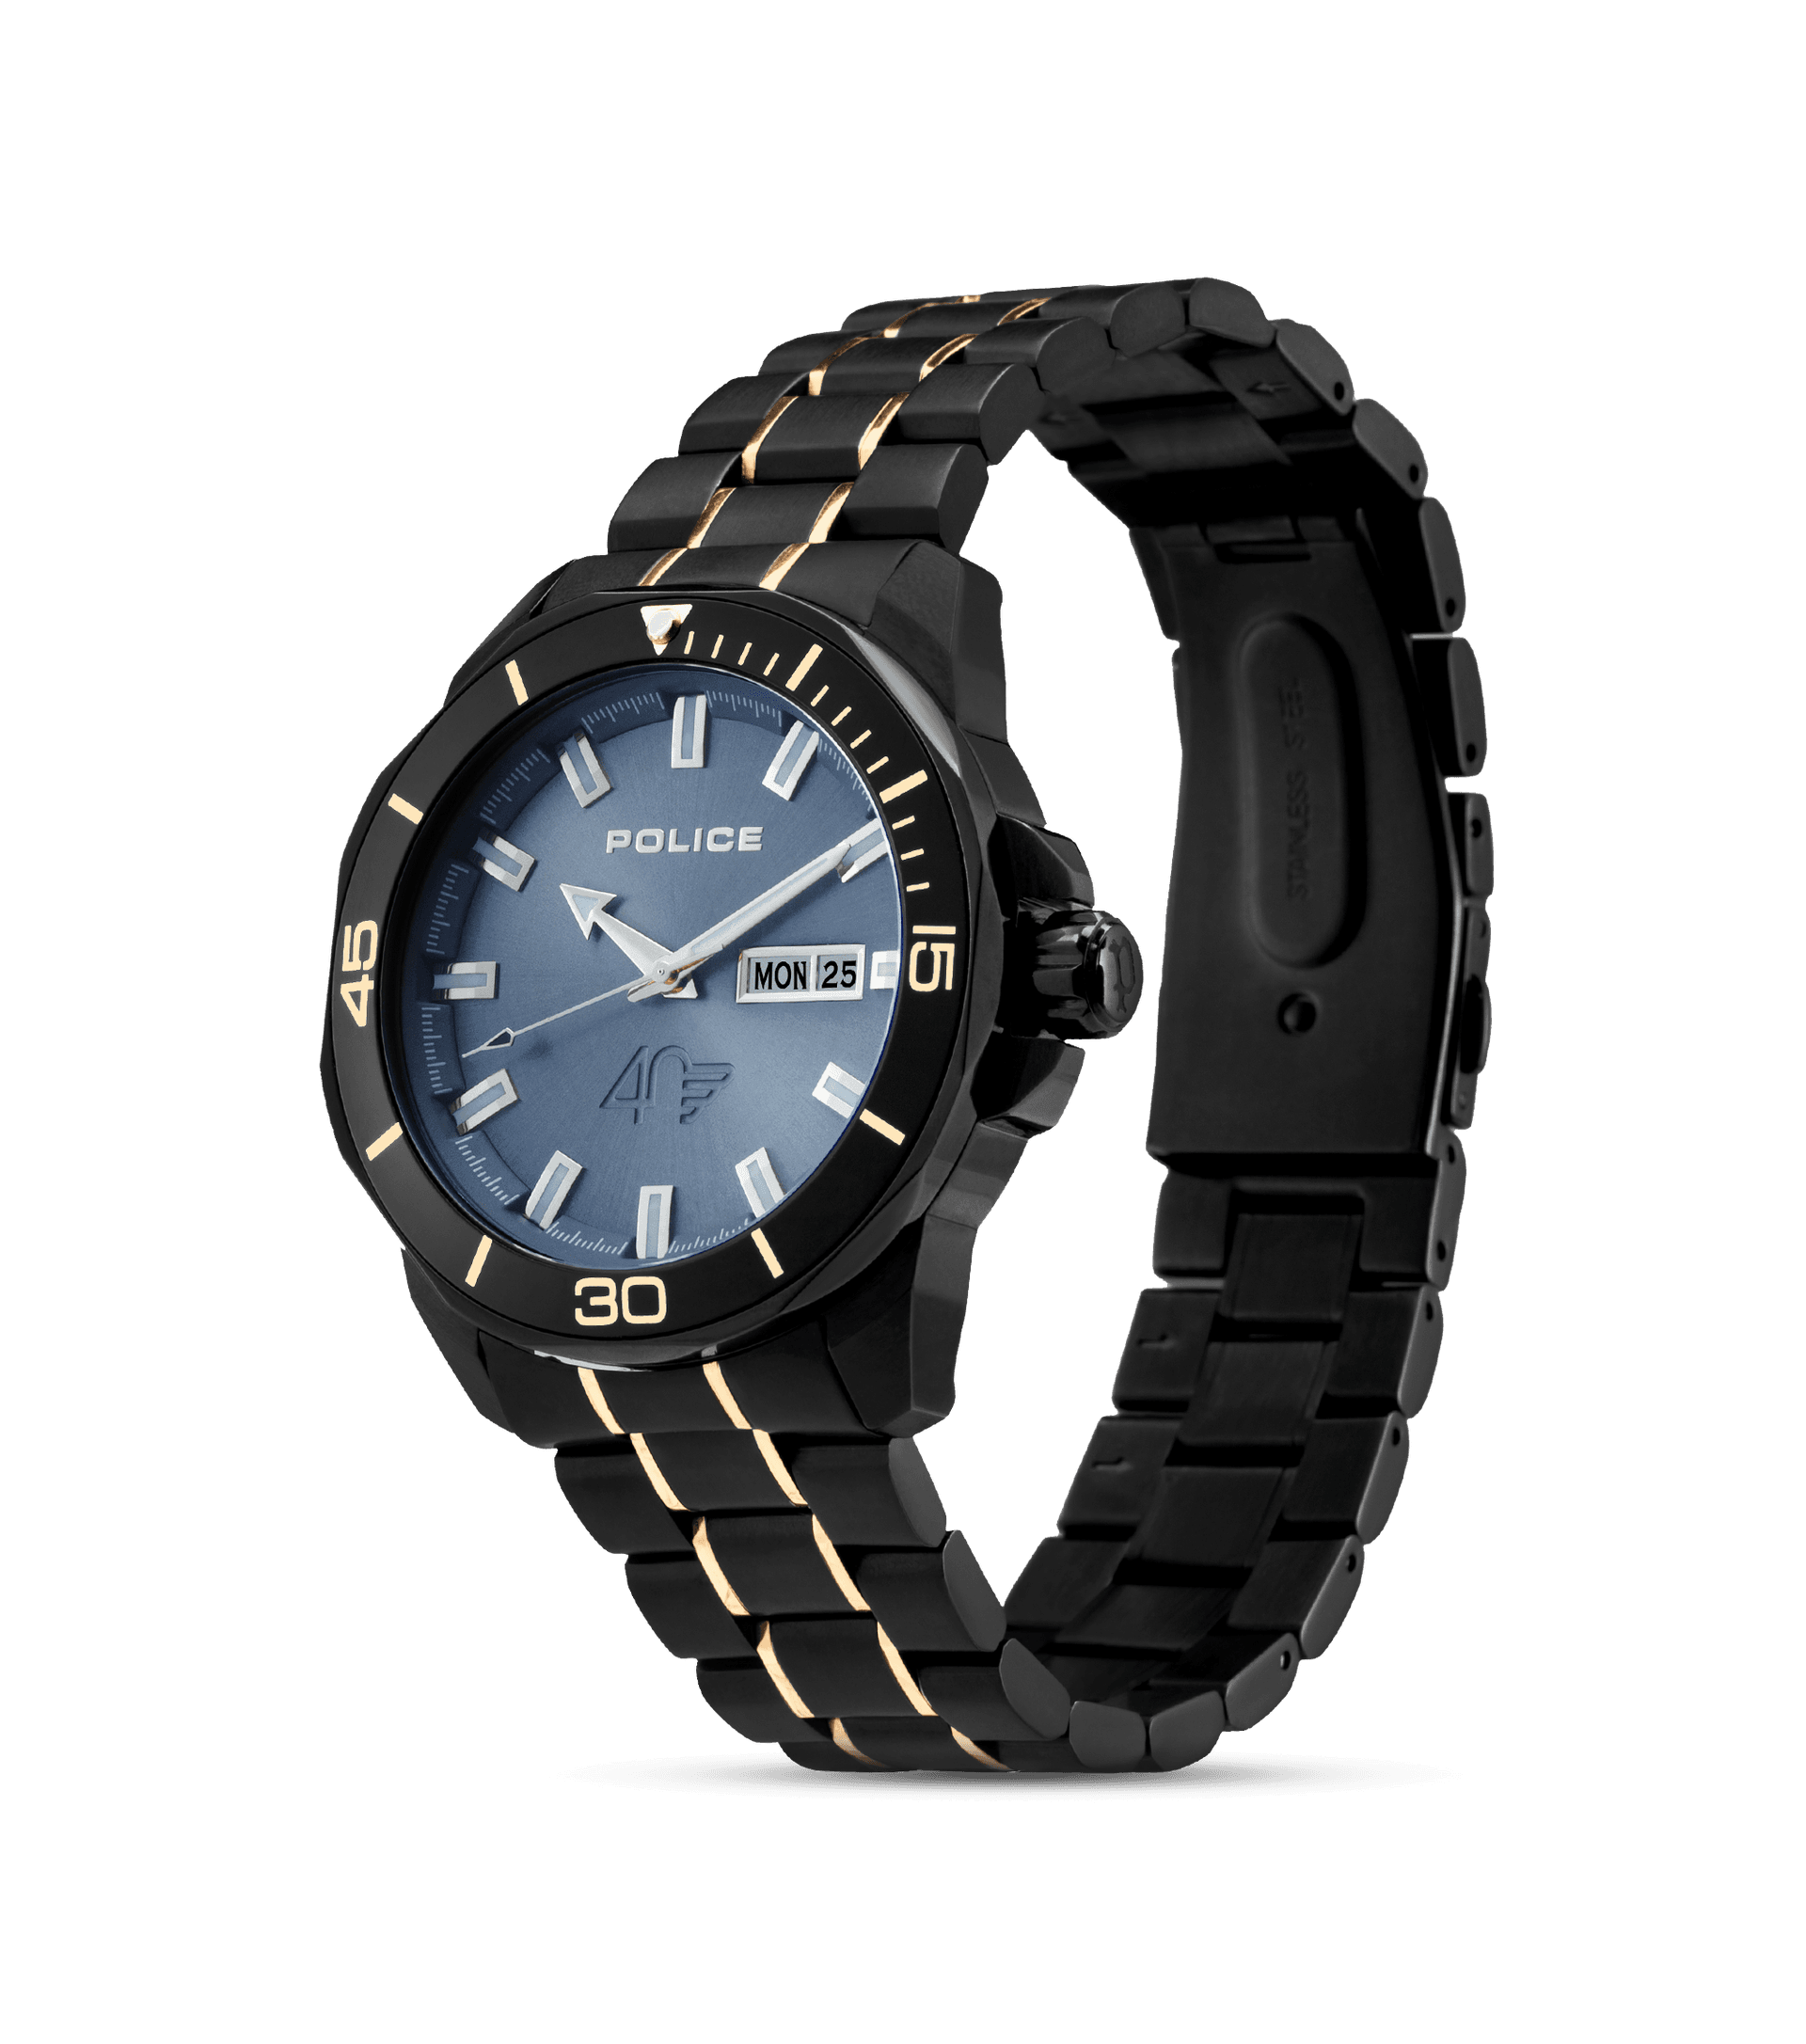 Police watches - The Anniversary Collection Watch And Wallet Gift